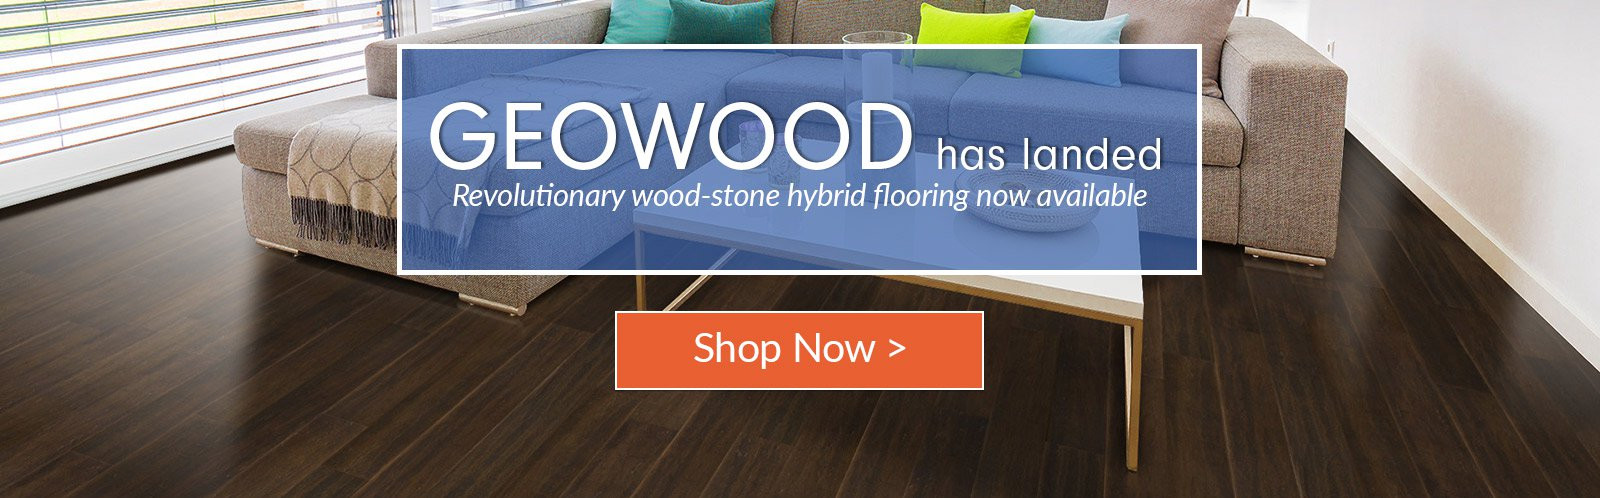 28 Ideal Diy Hardwood Floor Installation Video 2024 free download diy hardwood floor installation video of green building construction materials and home decor cali bamboo intended for geowood launch homepage slider